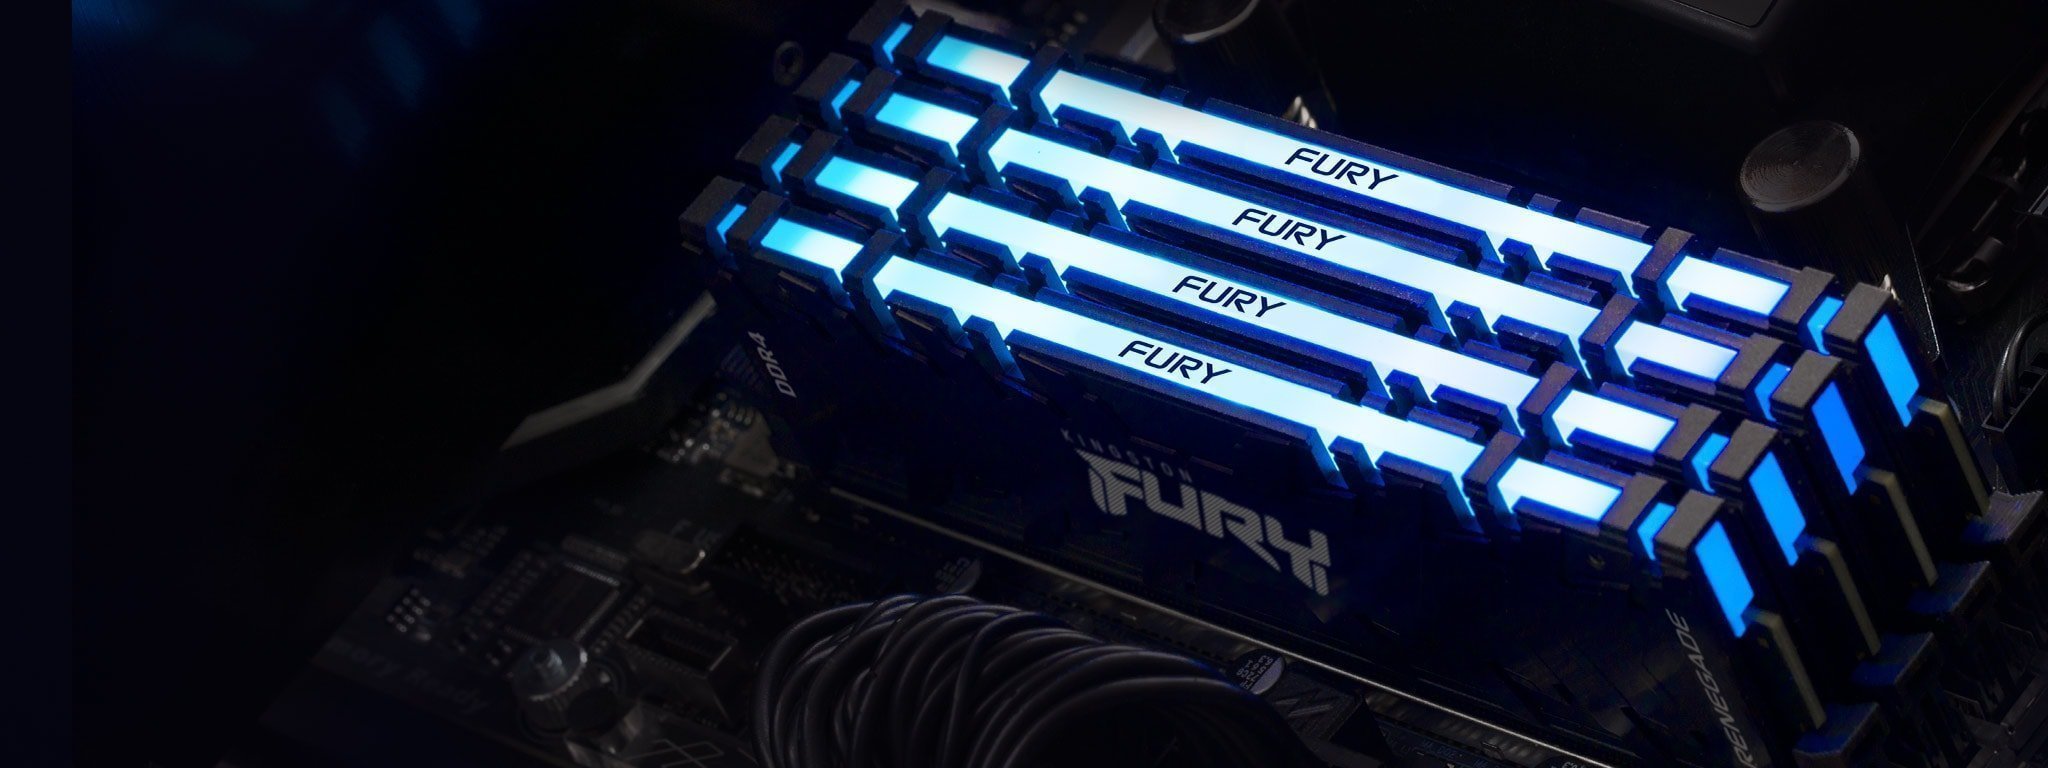 Kingston FURY RAM launched – DDR4 FURY Renegade has frequencies up to 5333MHz – 16GB 4266MHz CL19 available for £185